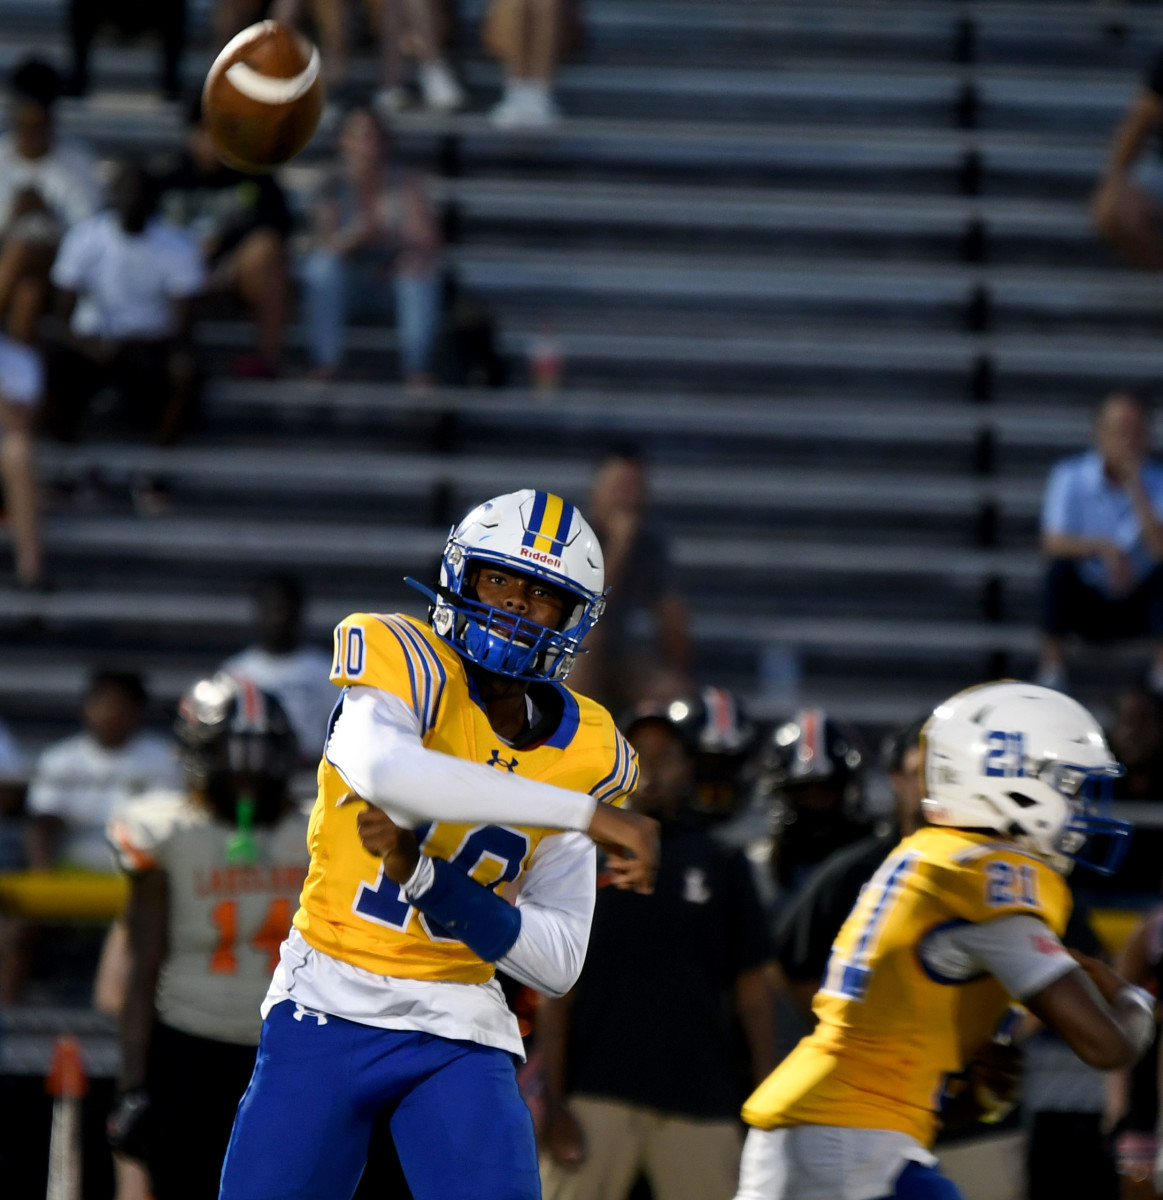 Largo quarterback Jeremy Thomas fires a pass out into the flat against Lakeland on Friday.